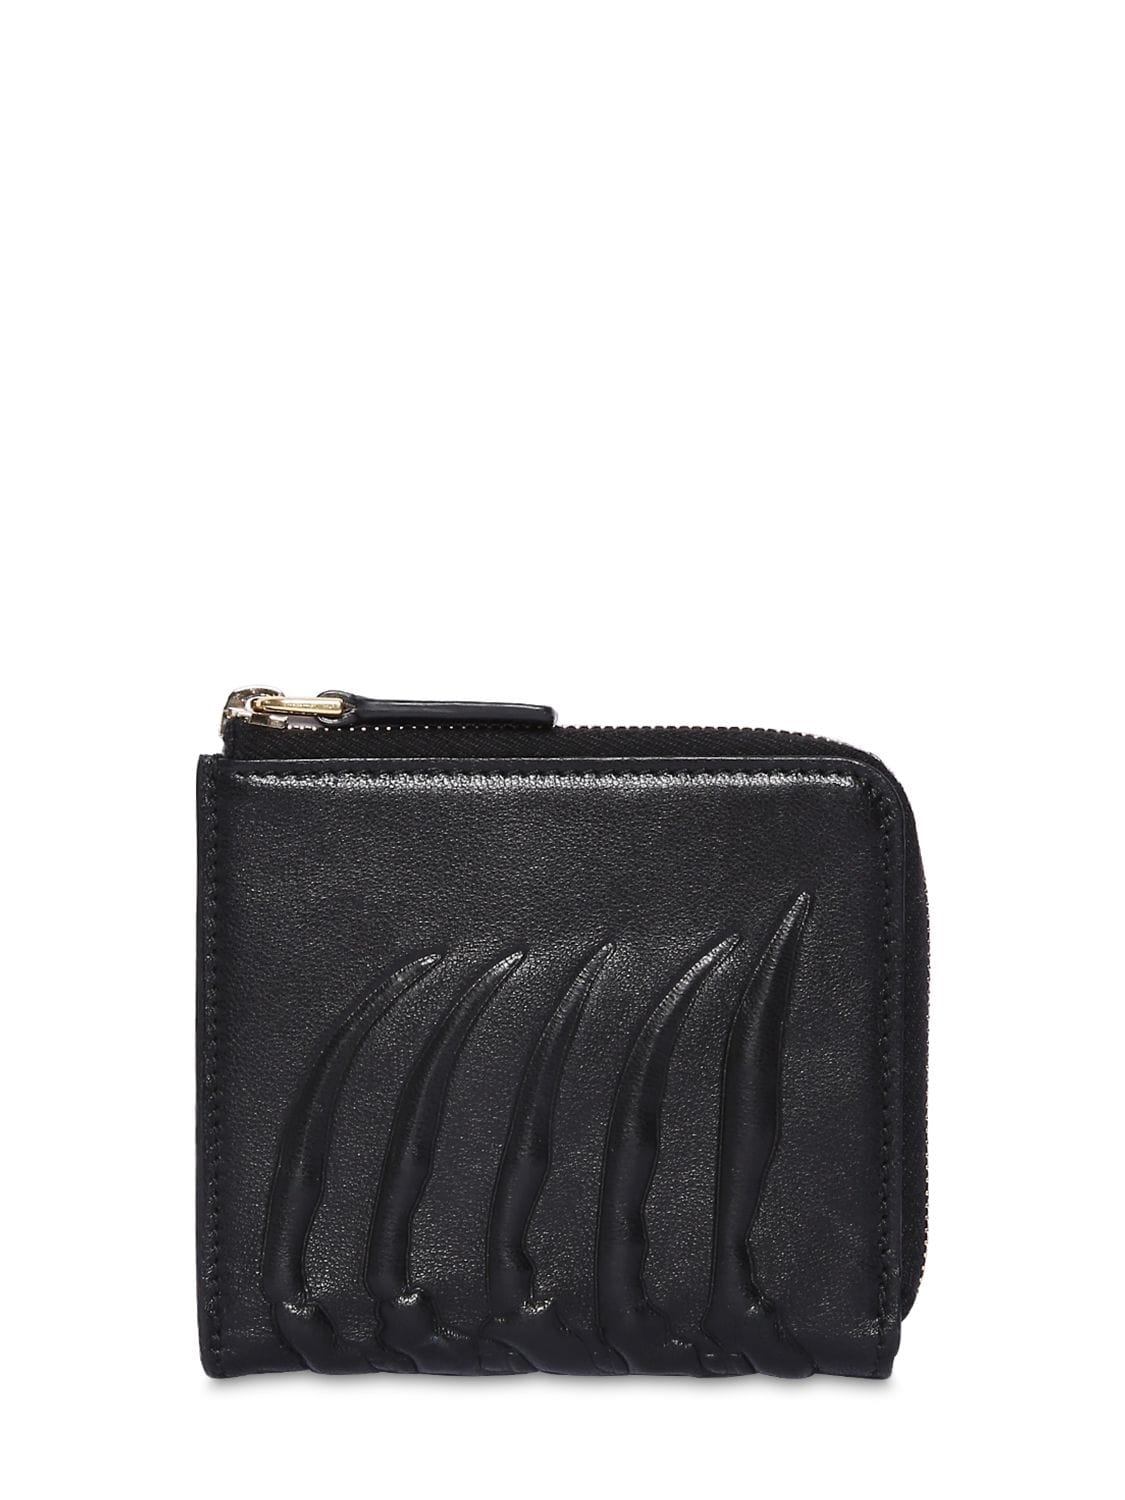 Rib cage leather coin wallet w 